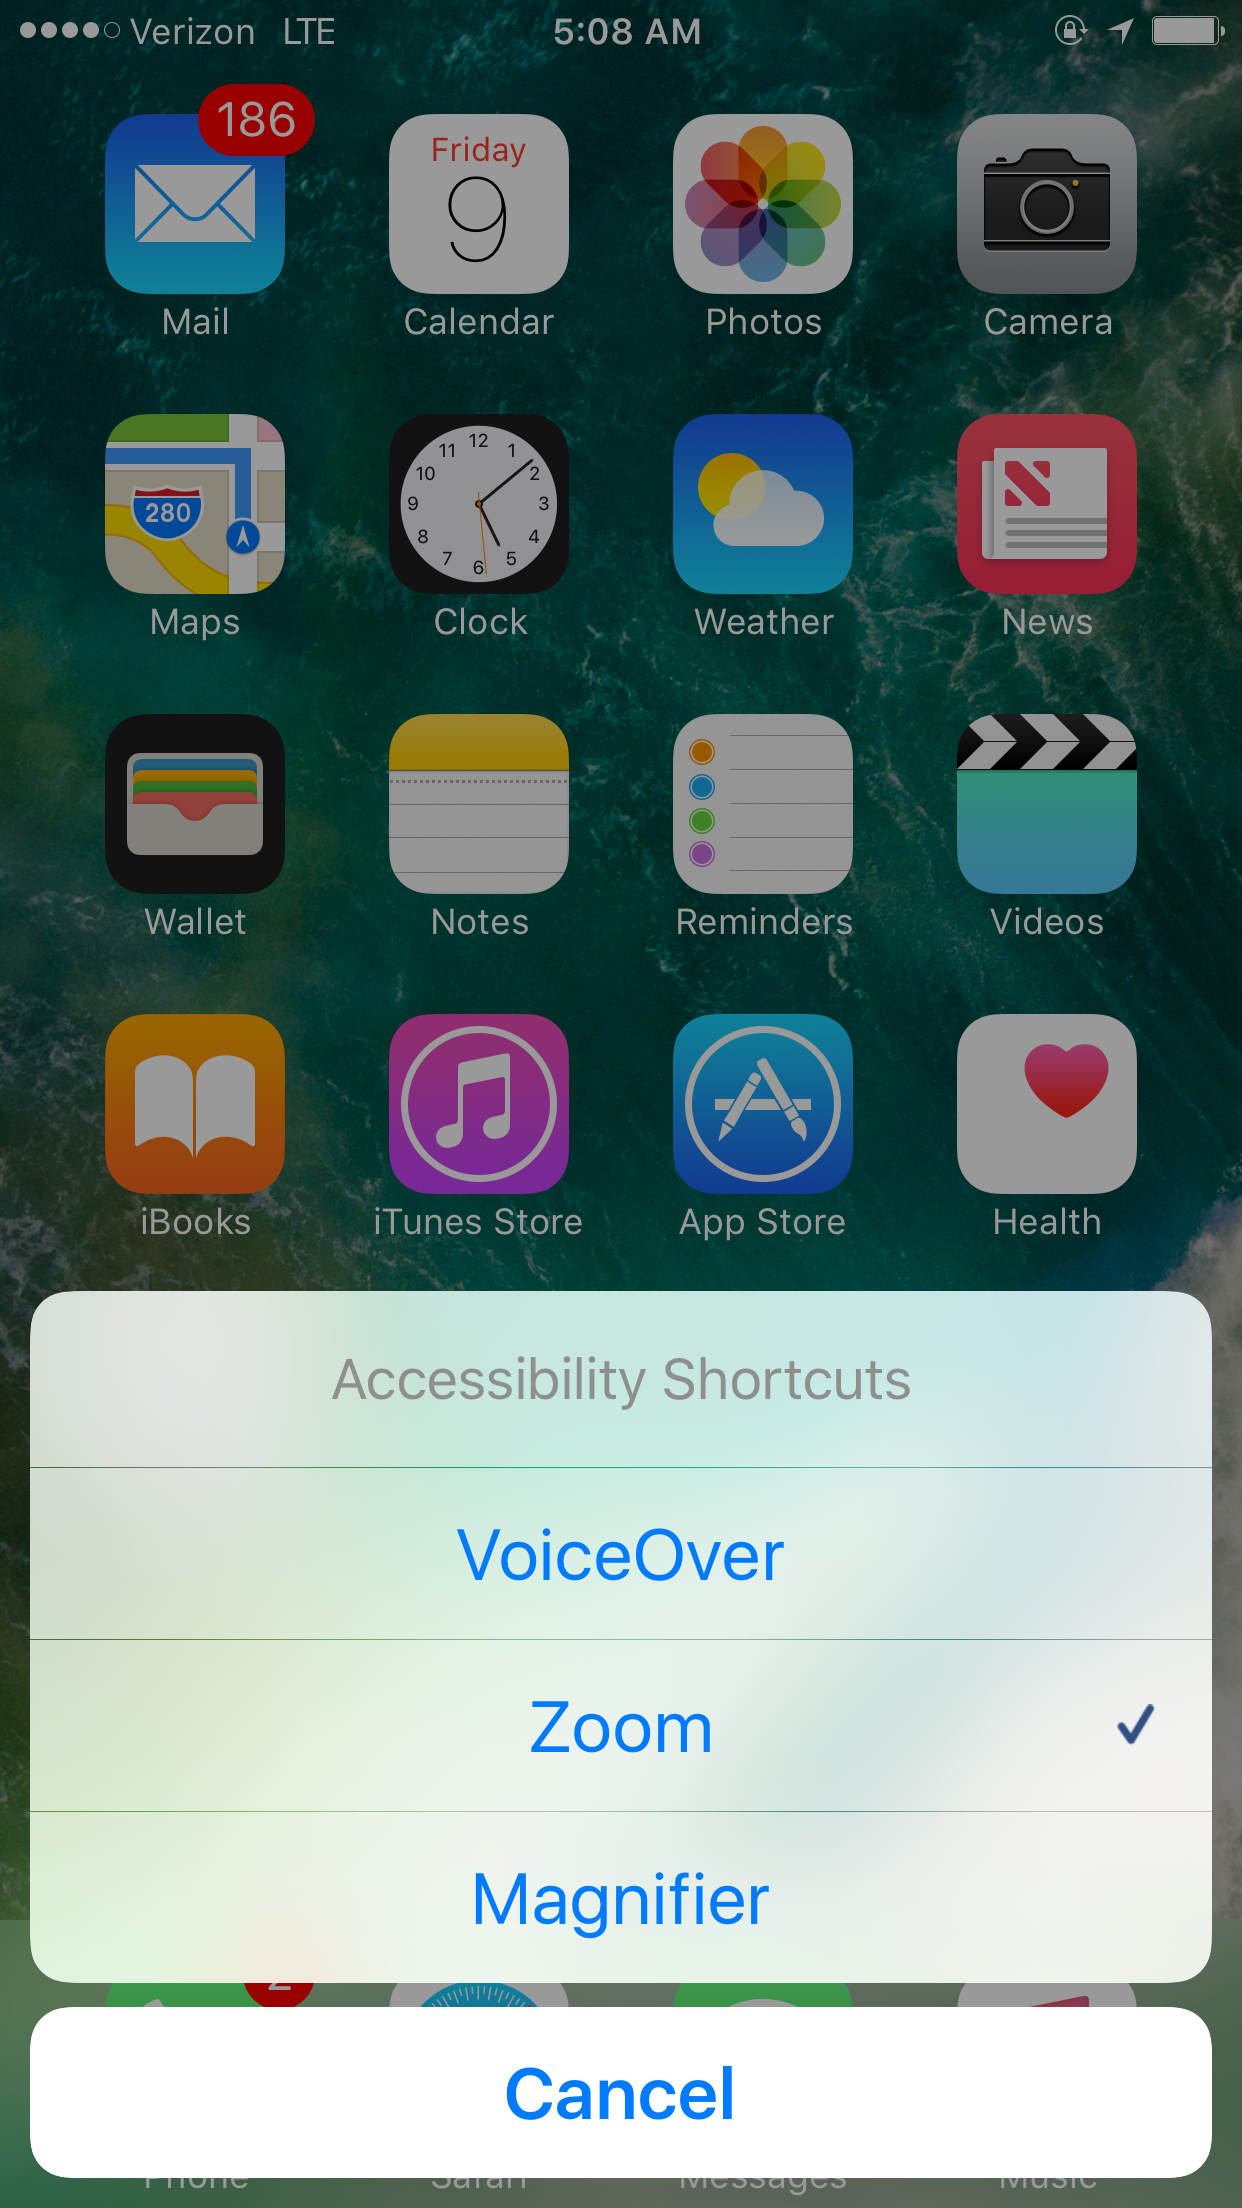 Image showing magnifier in accessibility shortcut menu.